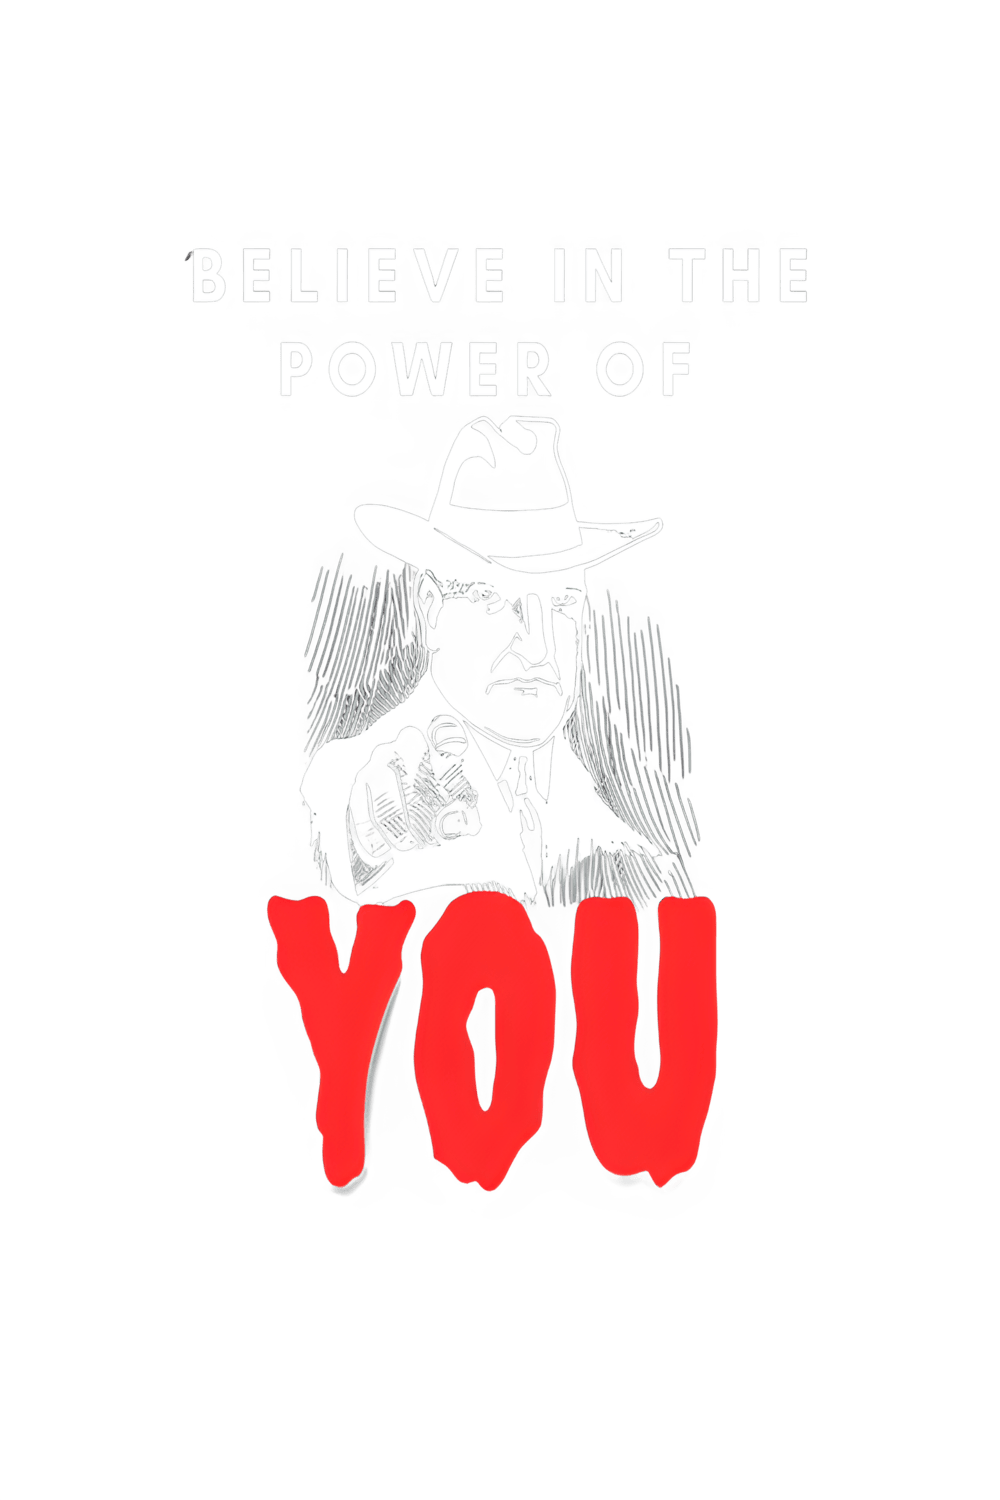 Believe in the Power of You amazing design pinterest preview image.